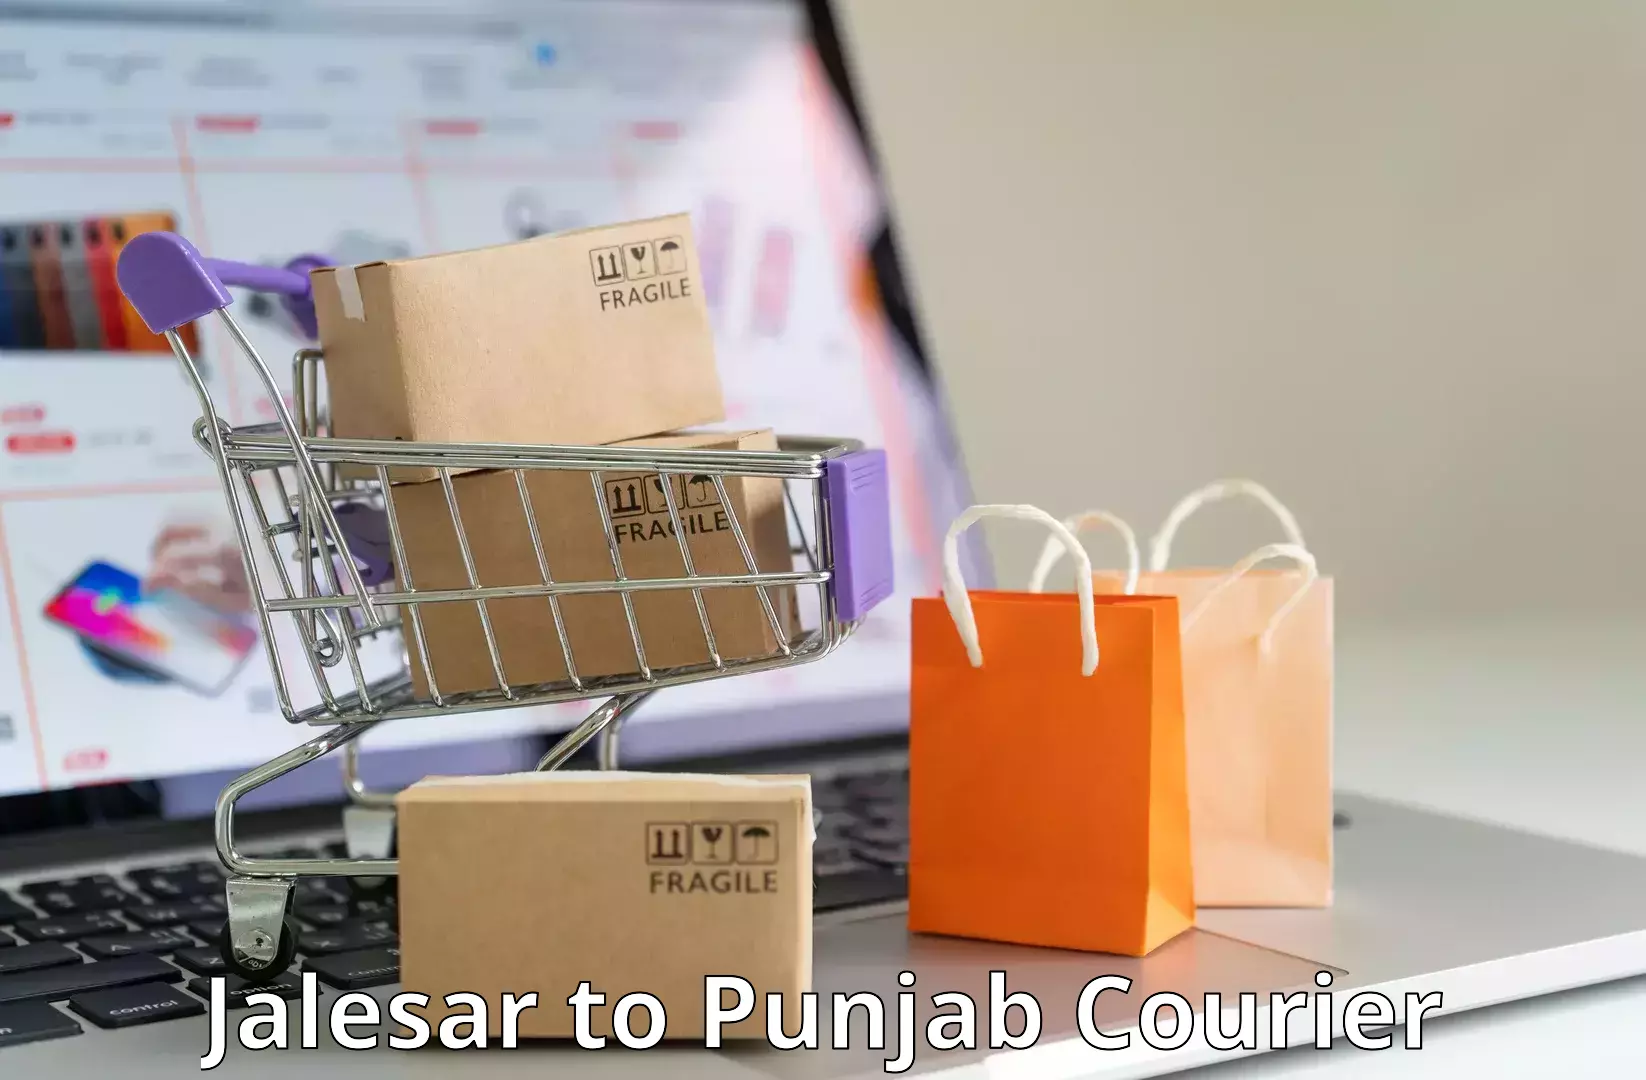 Overnight delivery services Jalesar to Dhuri